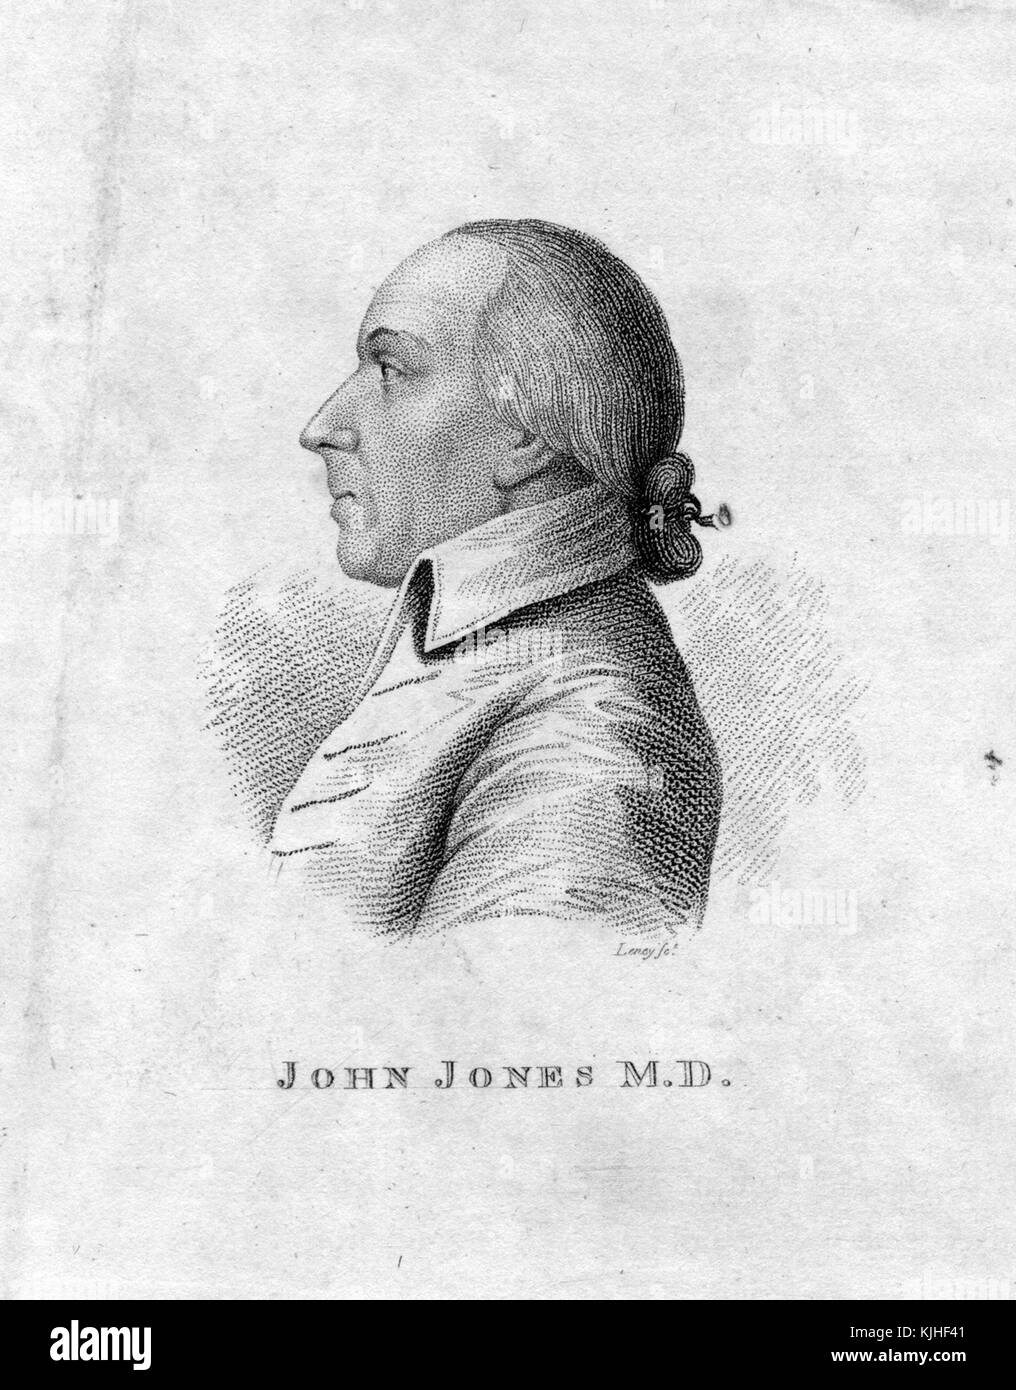 An engraving from a portrait of a man identified as John Jones MD, he is wearing a jacket that is typical of clothing worn during the 18th century, his hair style is also typical of the time, 1832. From the New York Public Library. Stock Photo